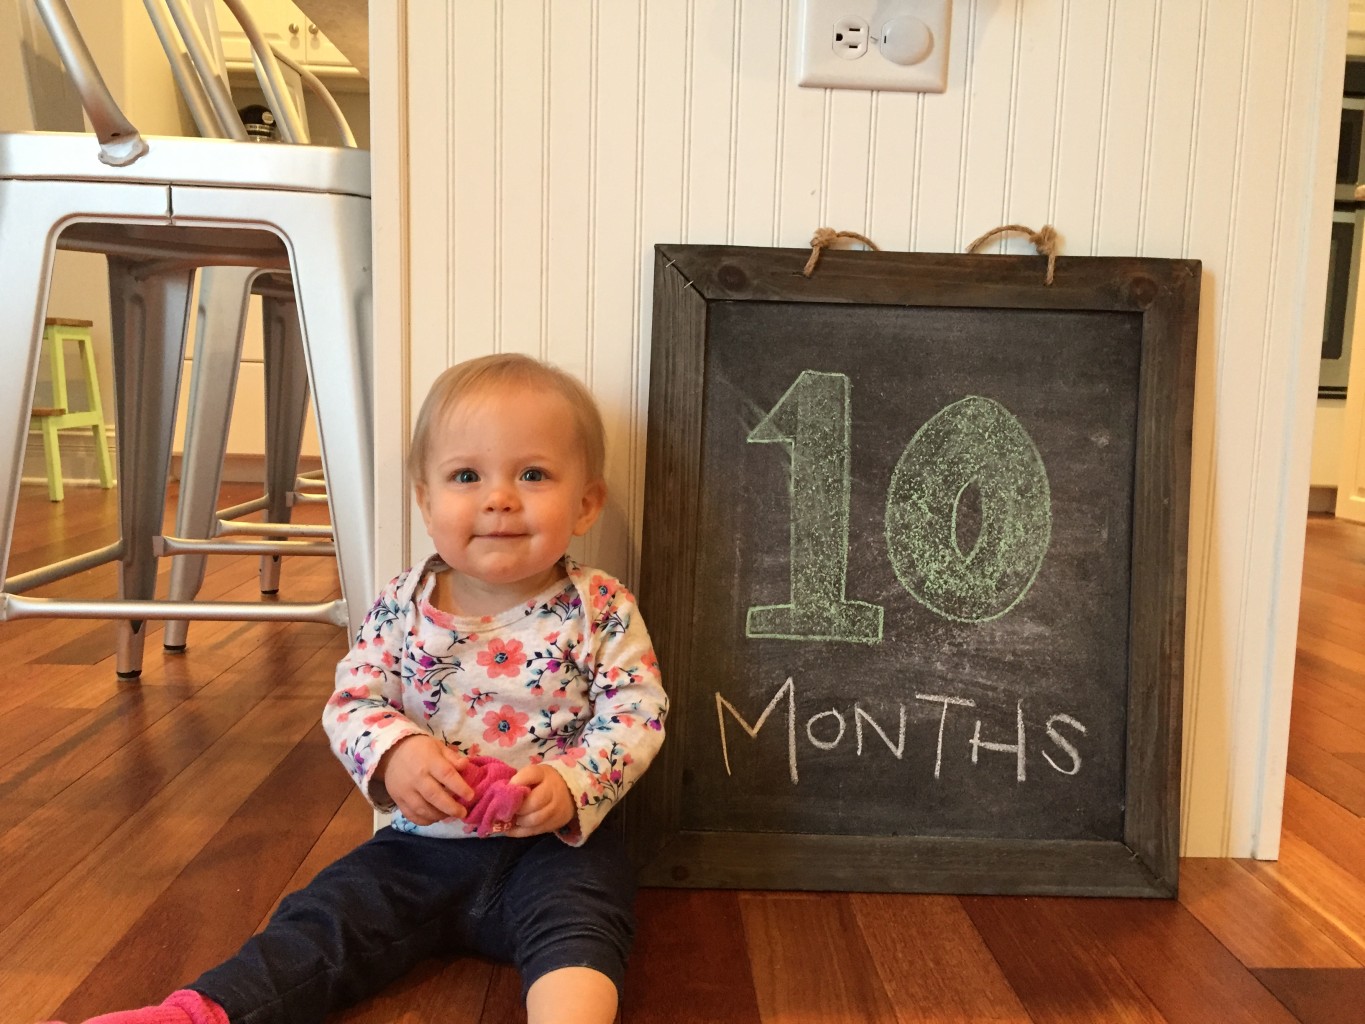 Campbell at 10 months